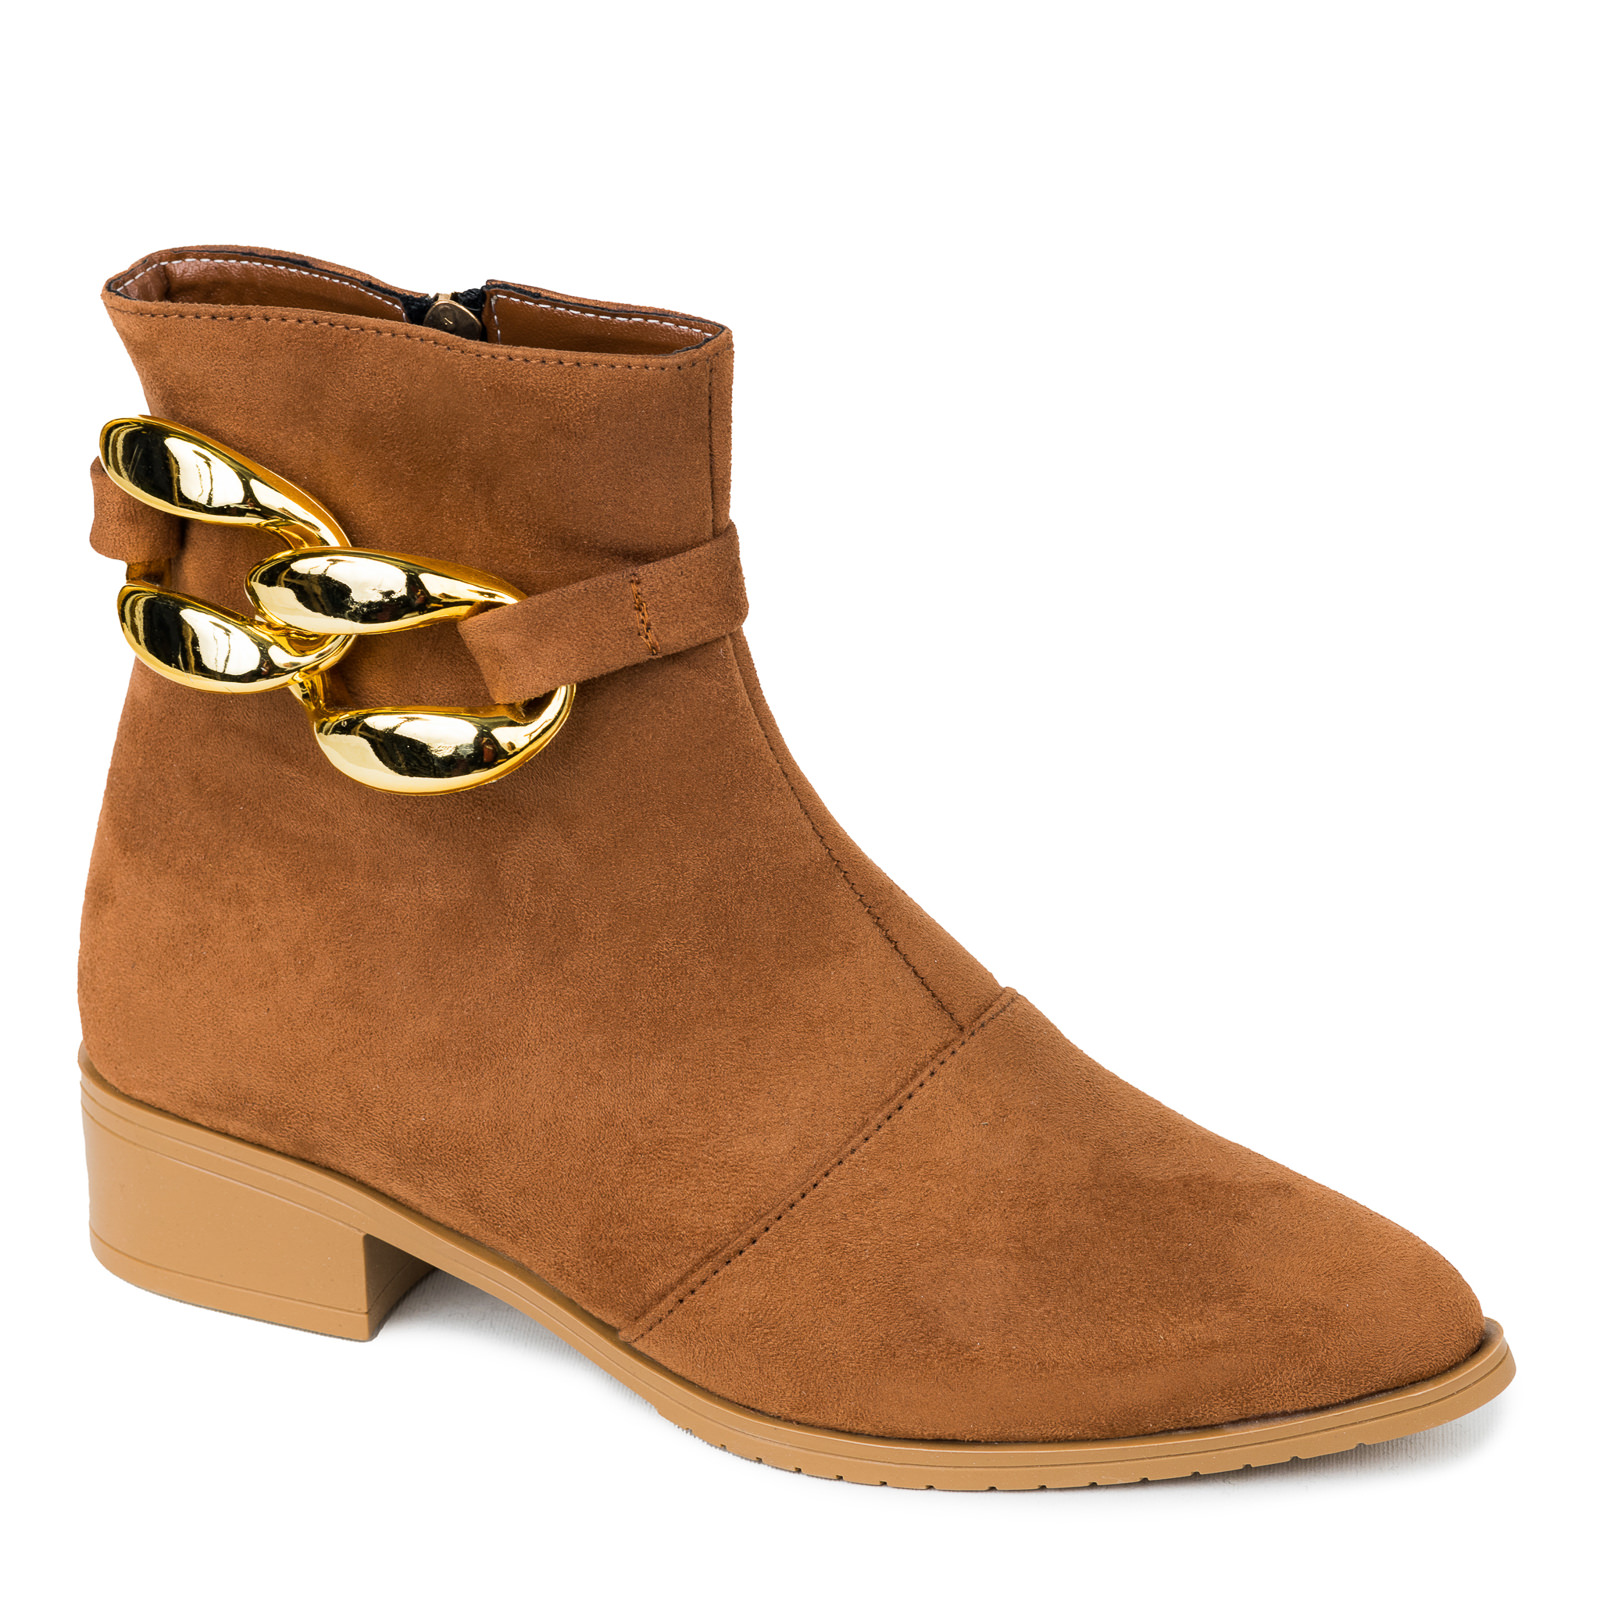 Women ankle boots B357 - CAMEL